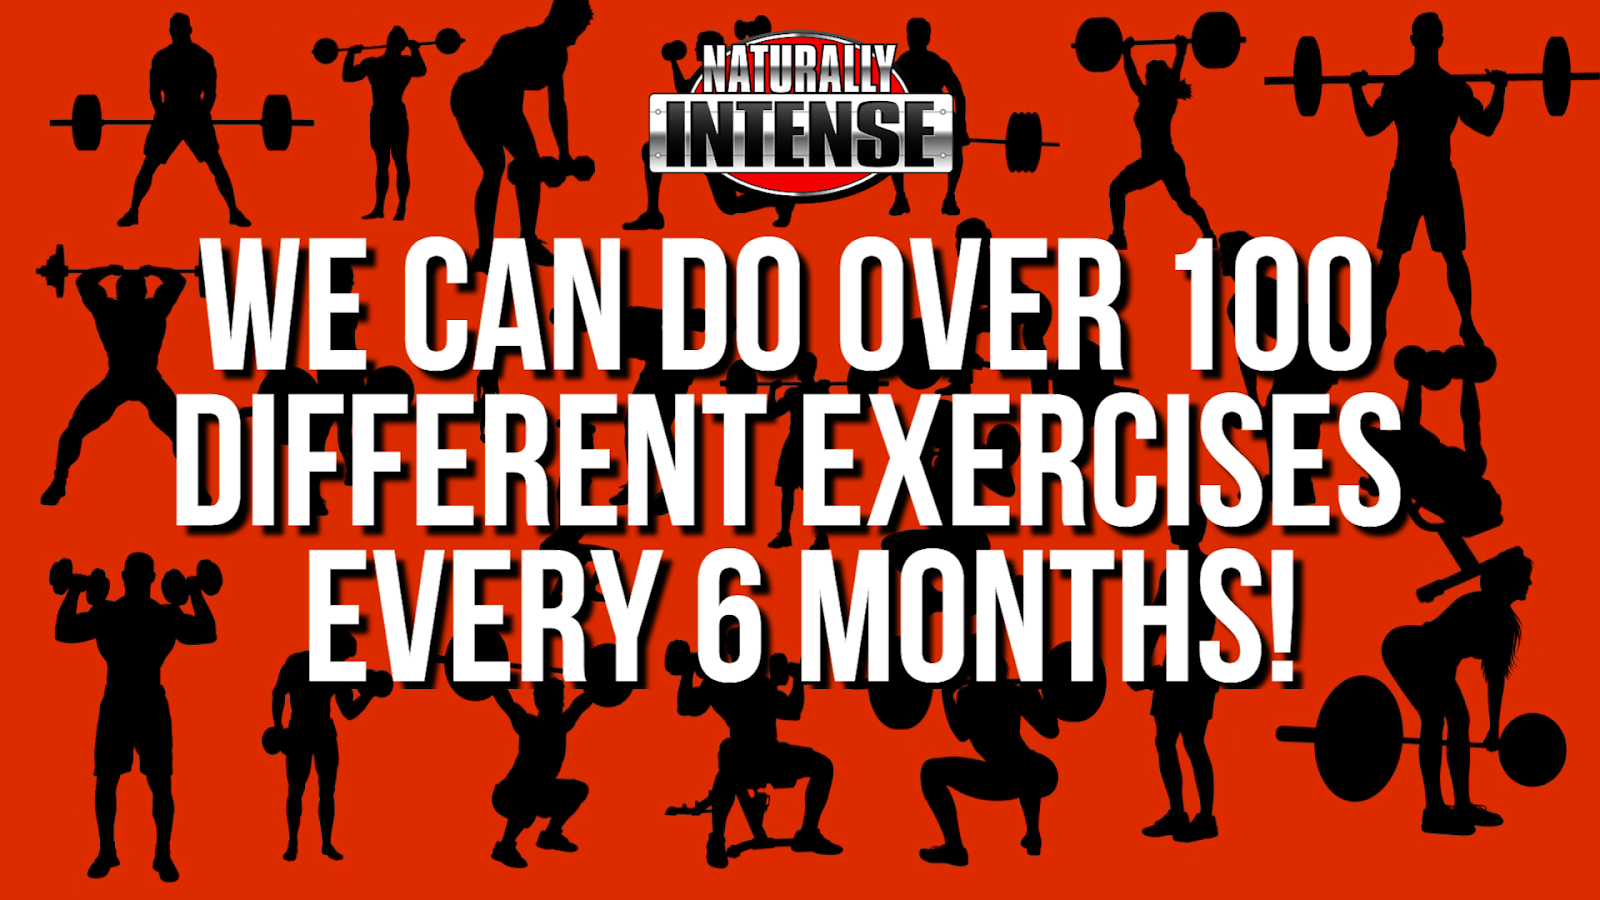 High intensity training allows you to do different exercises every workout